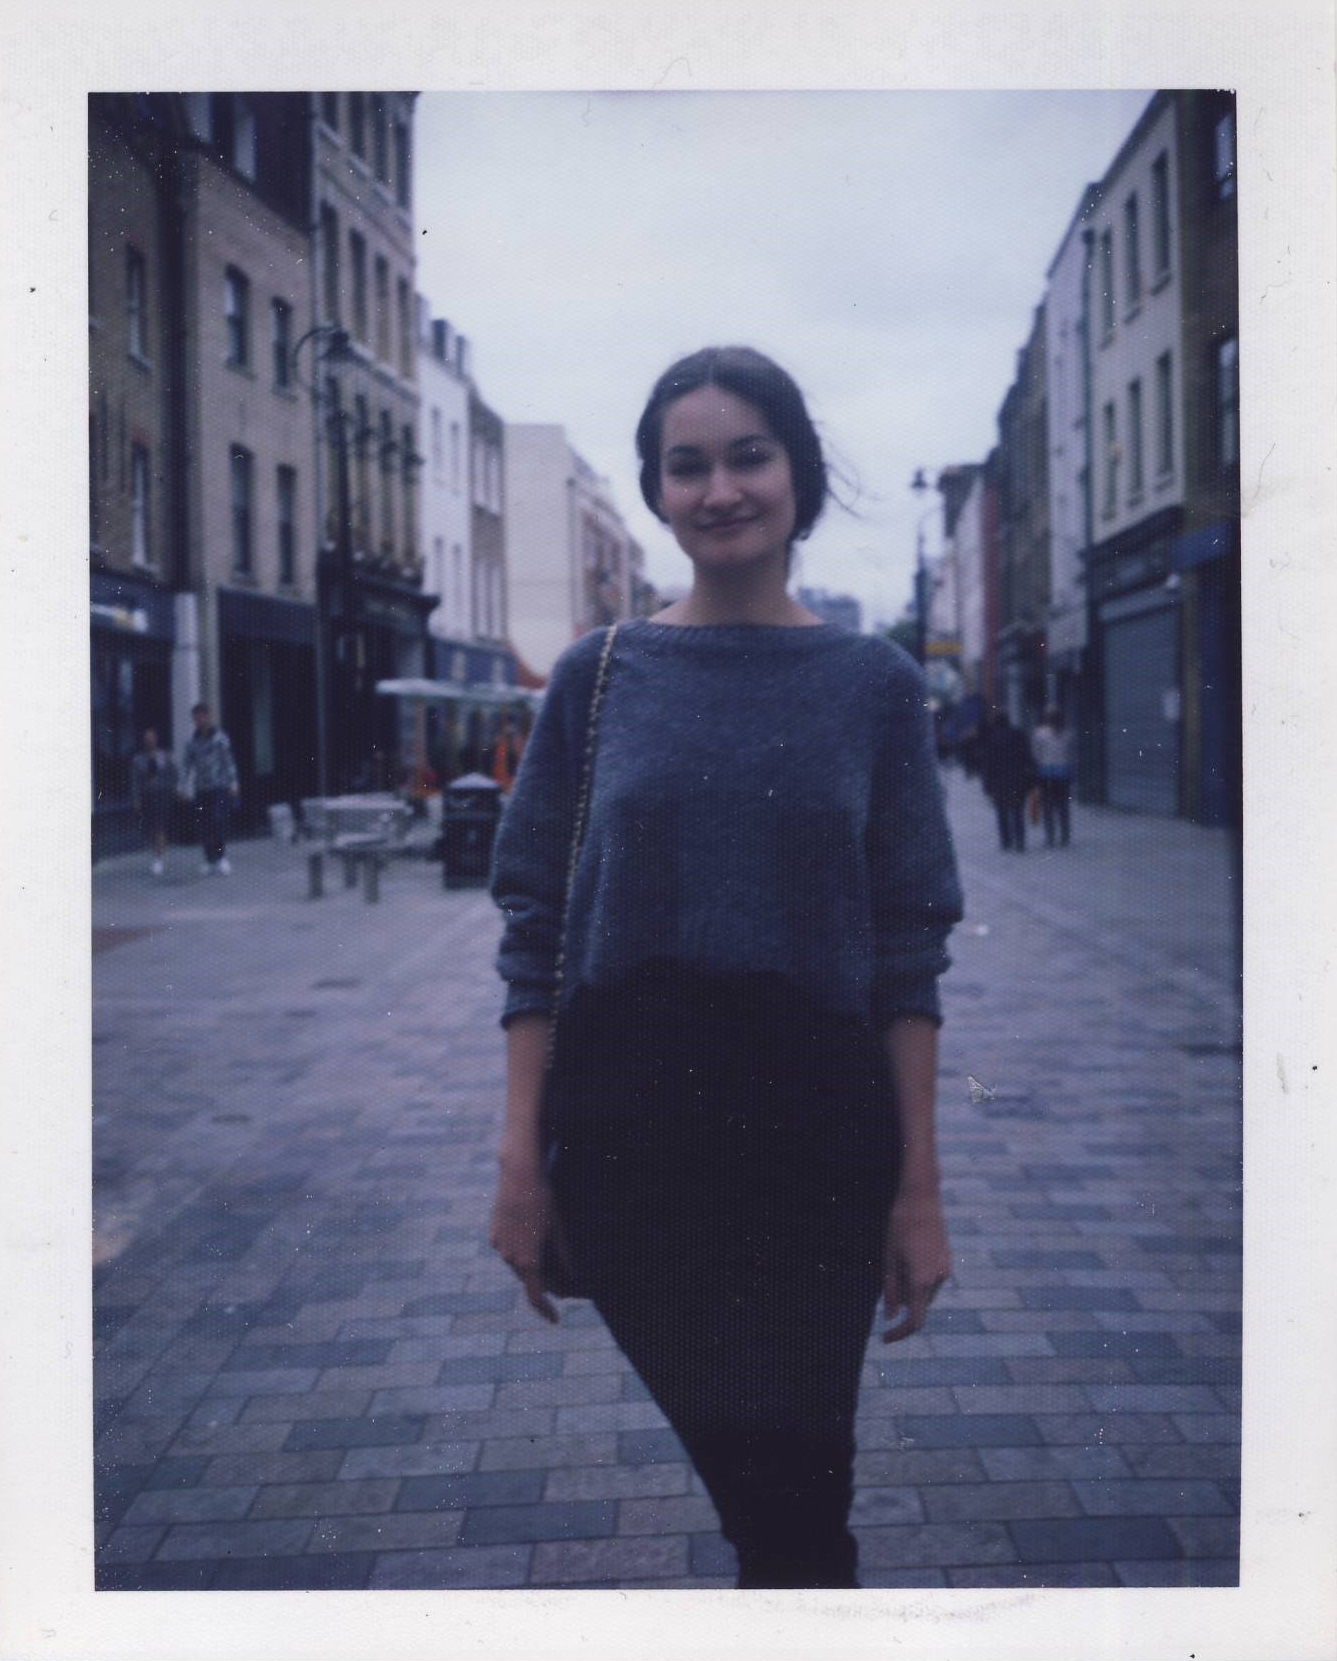 A polaroid of Eva standing in the street and smiling at the camera.